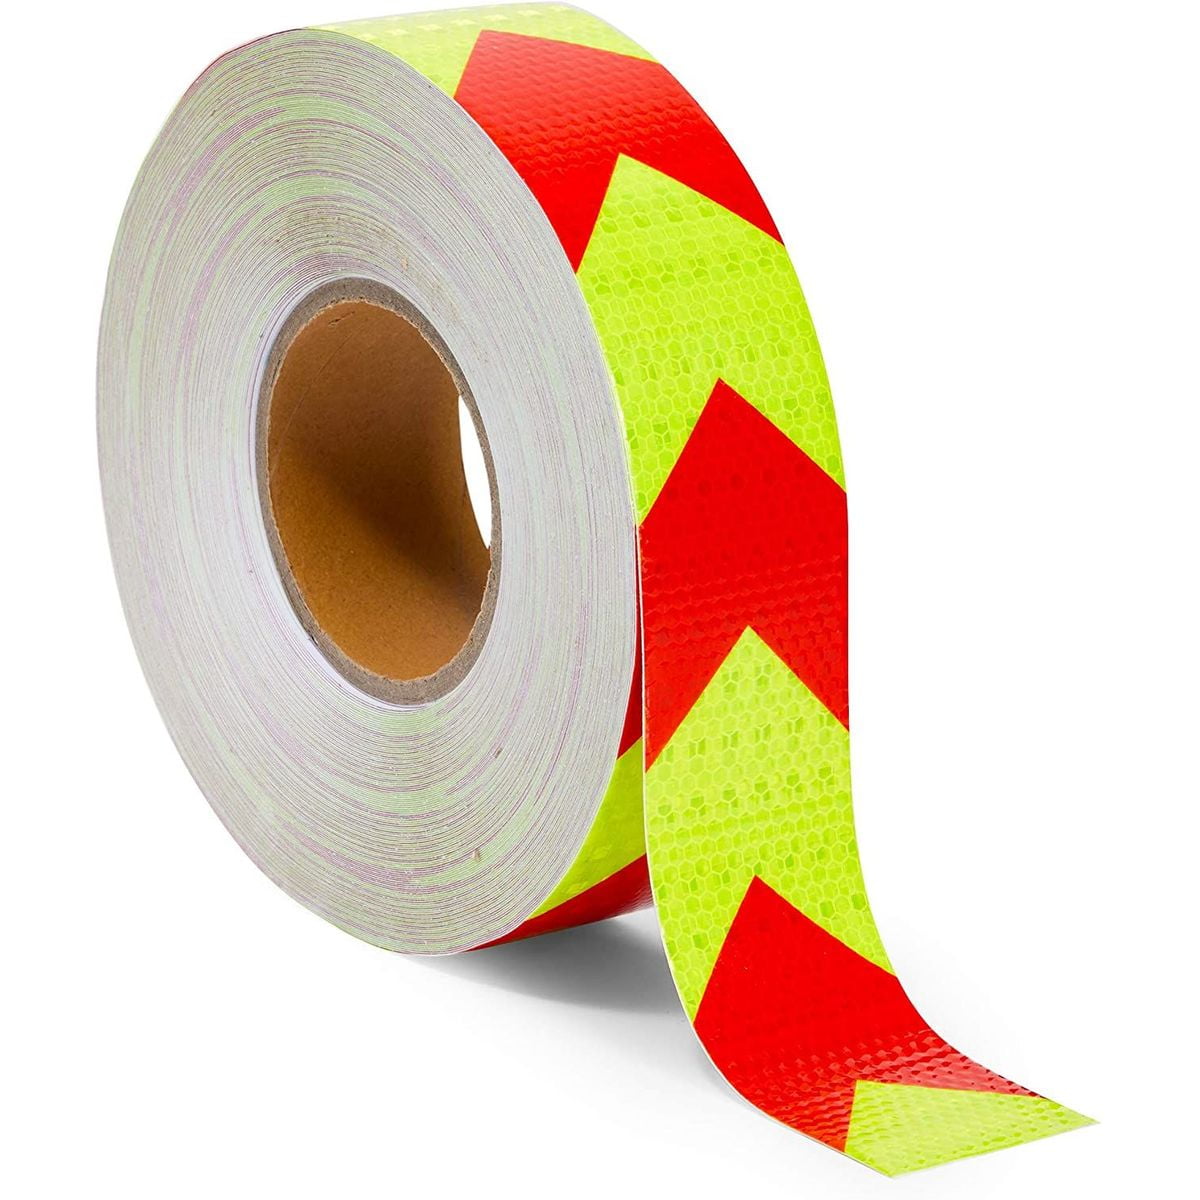 Vehicles 4 x Reflective Adhesive Strips 8" x 1" Hazards 5 Colours Crafts 